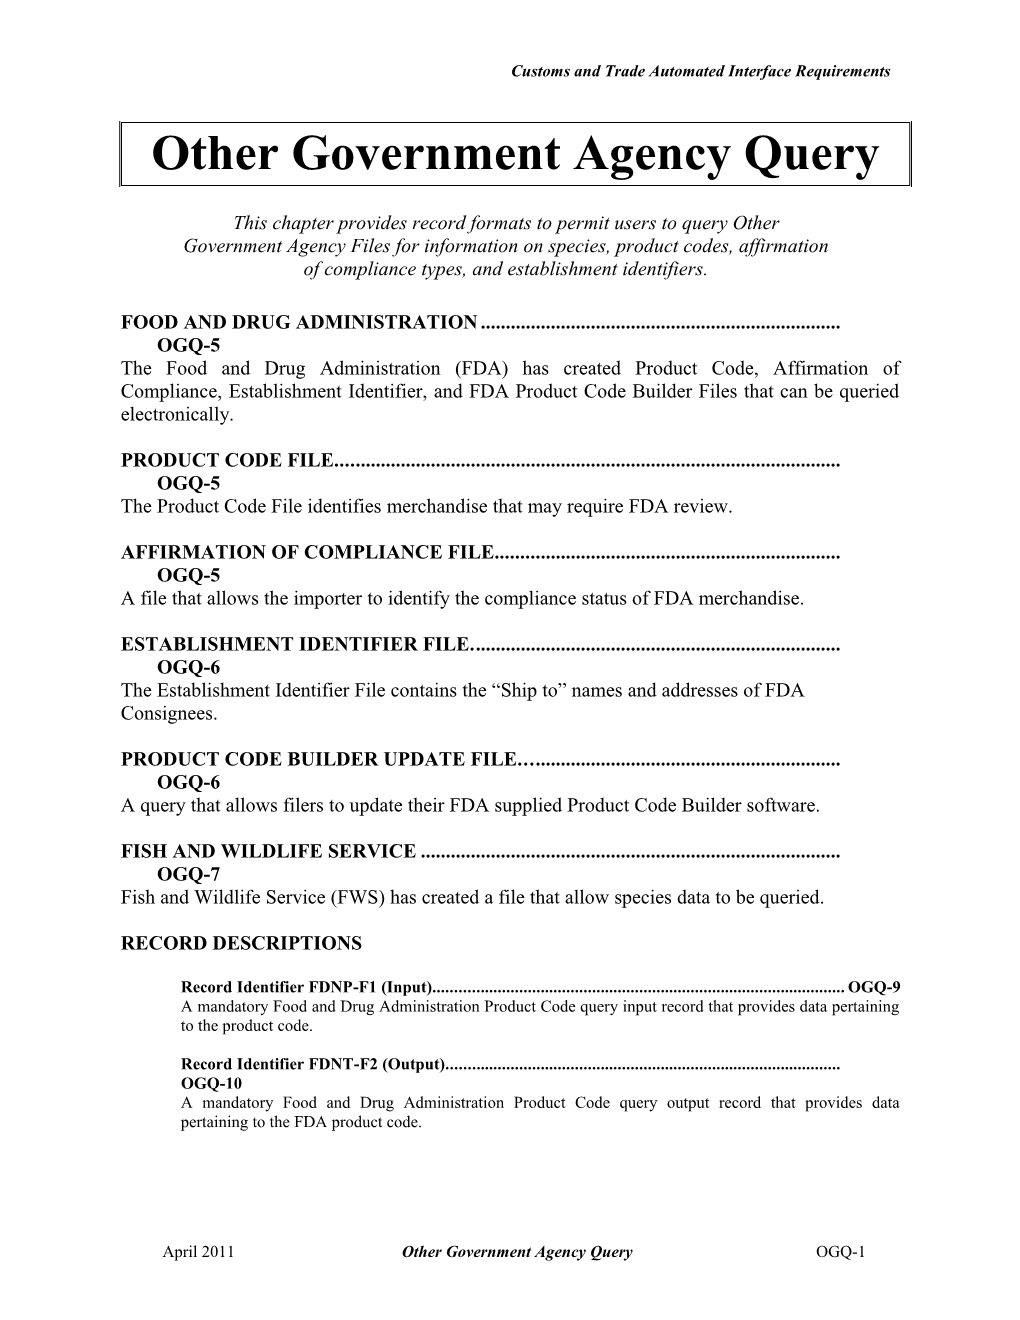 Other Government Agency Query